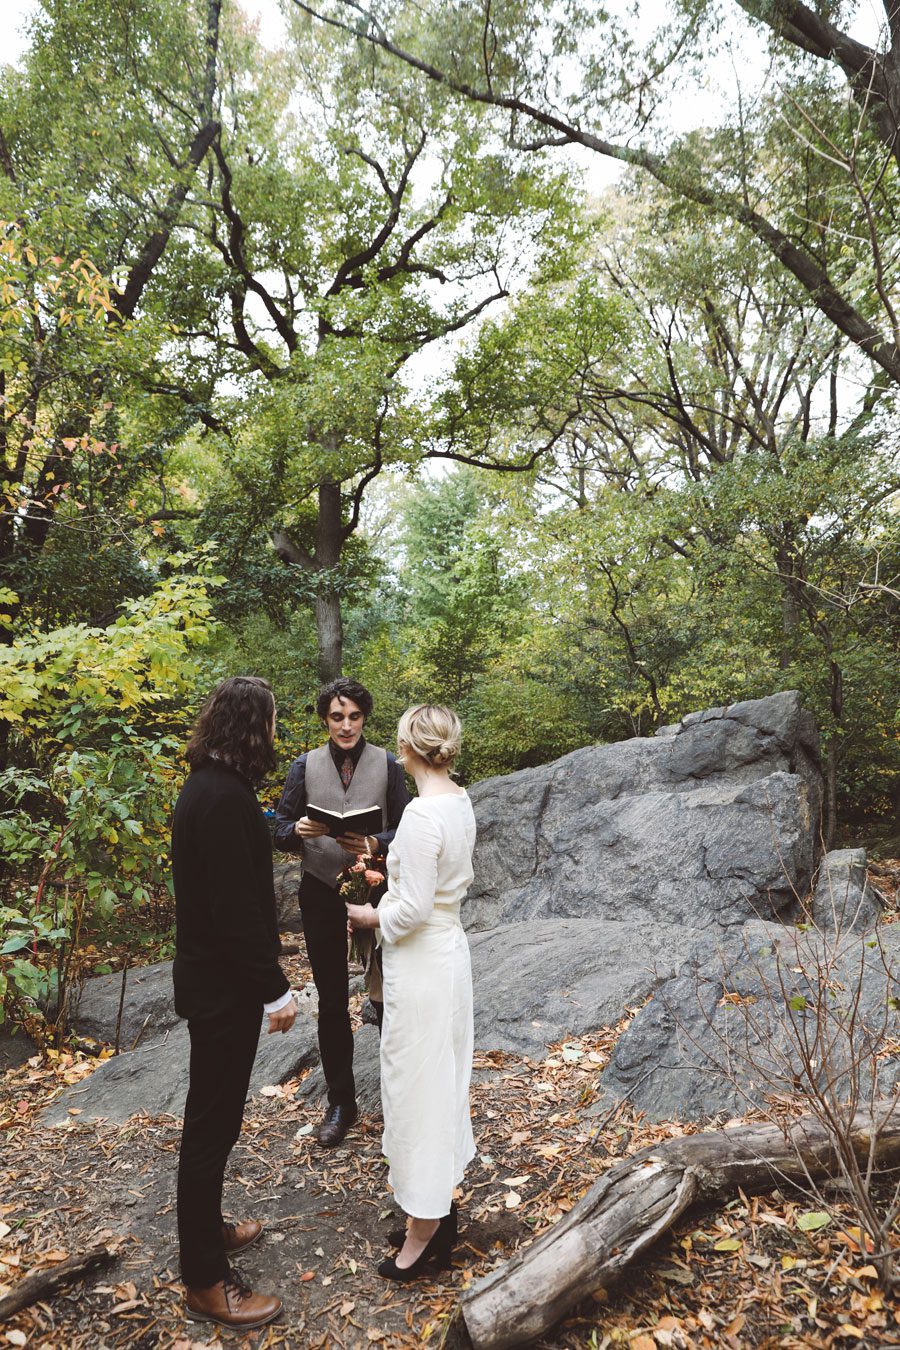 Central Park photos and officiant